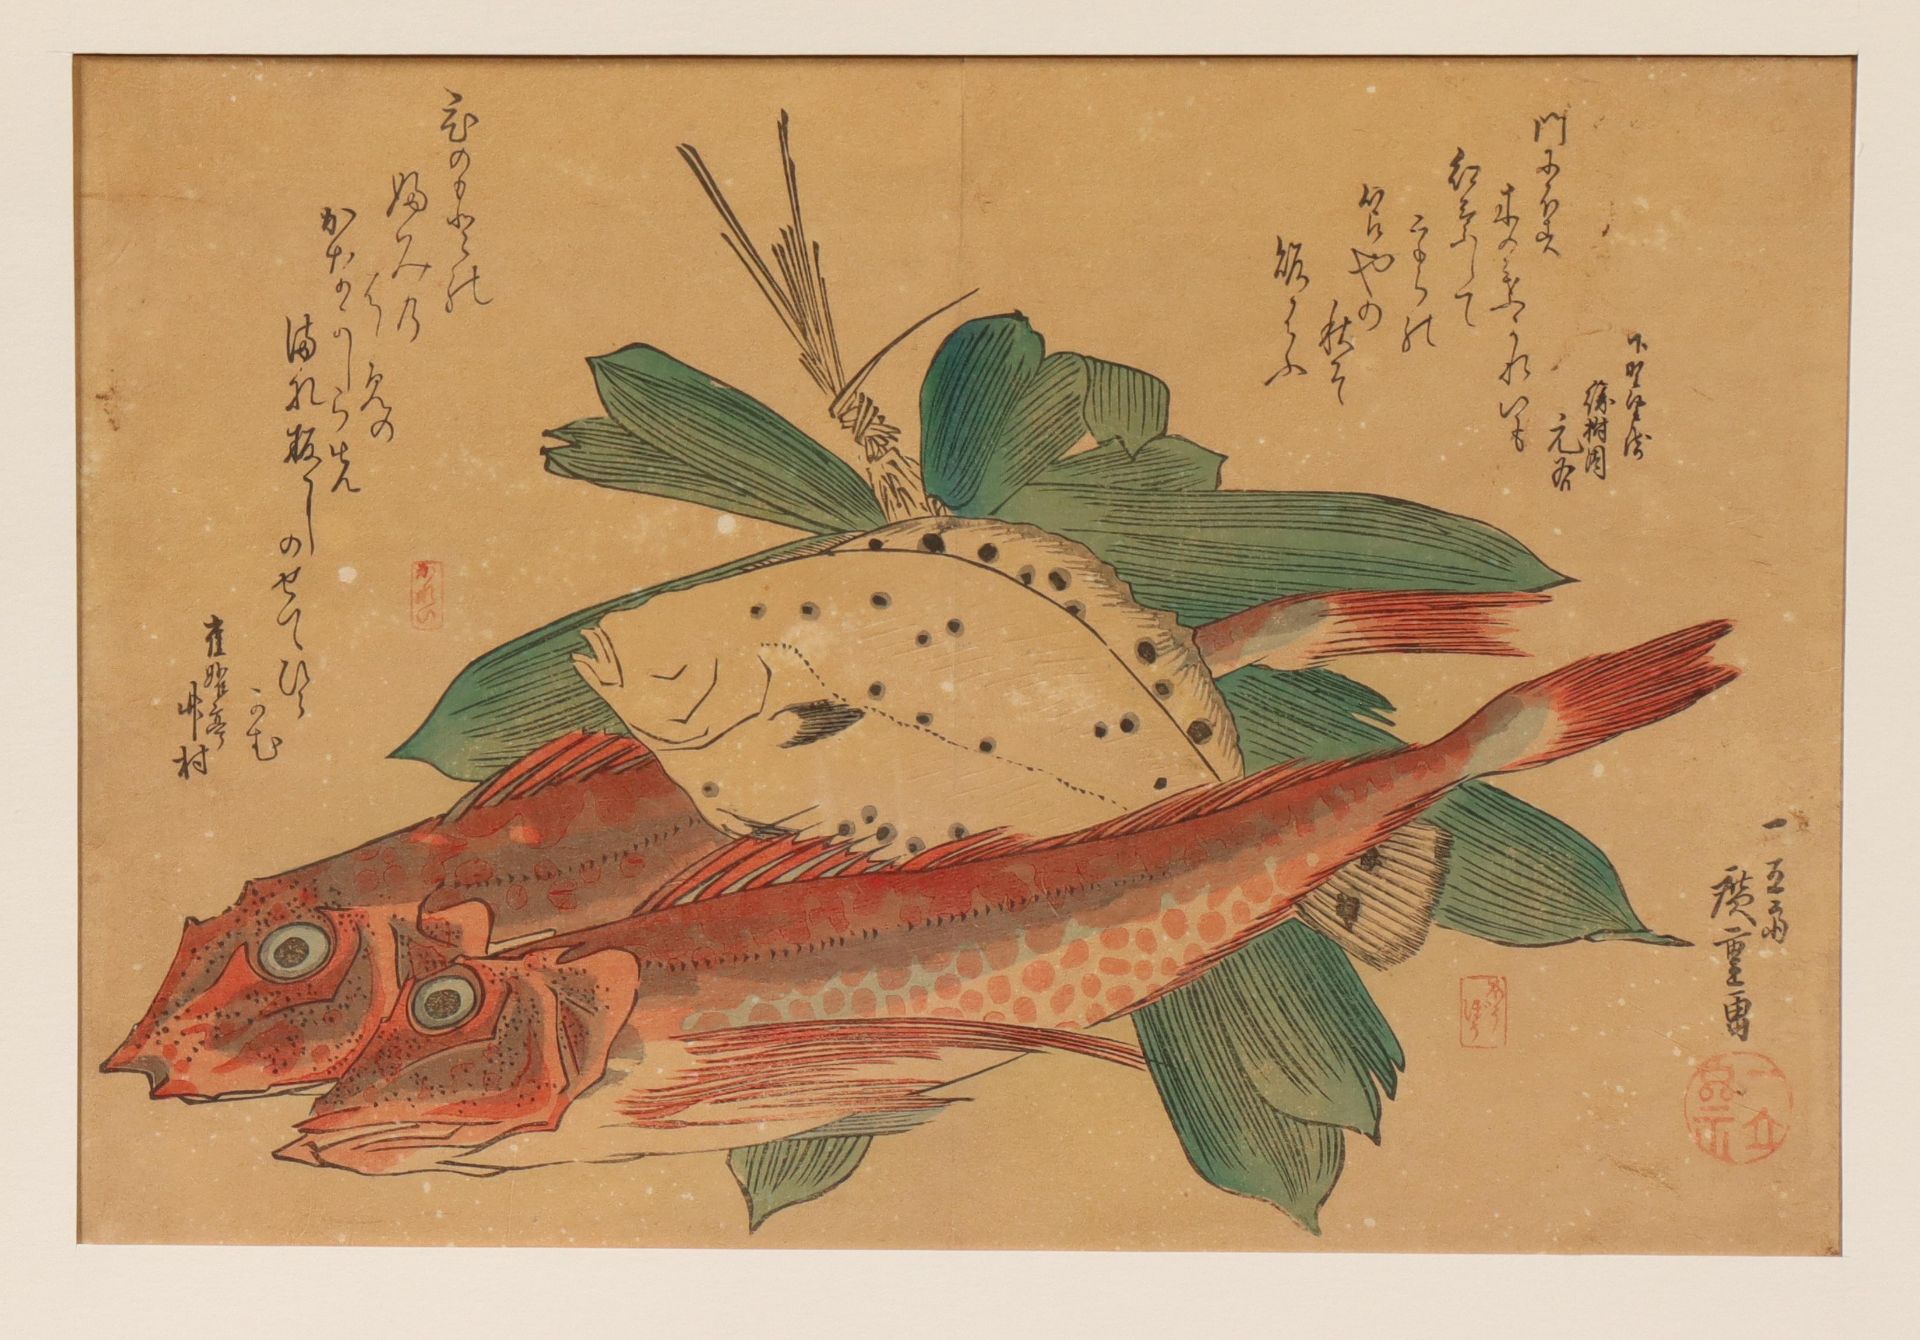 Japan, two woodblock prints, one by Utagawa Hiroshige (1797-1858), the other probably a copy after H